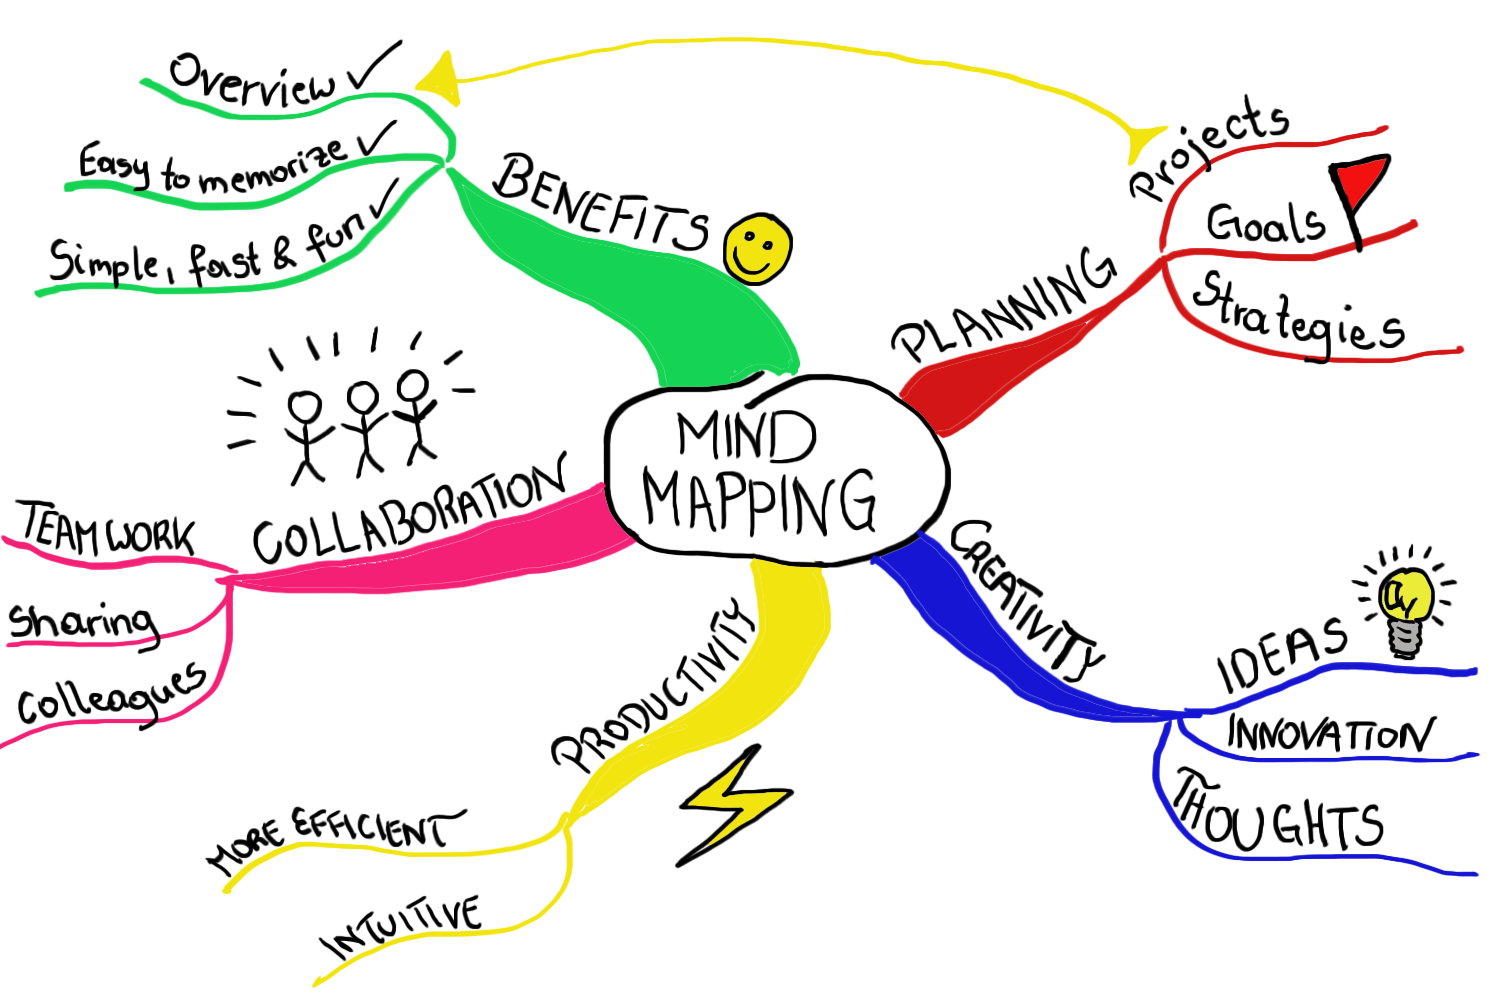 TRAINING MIND MAPPING